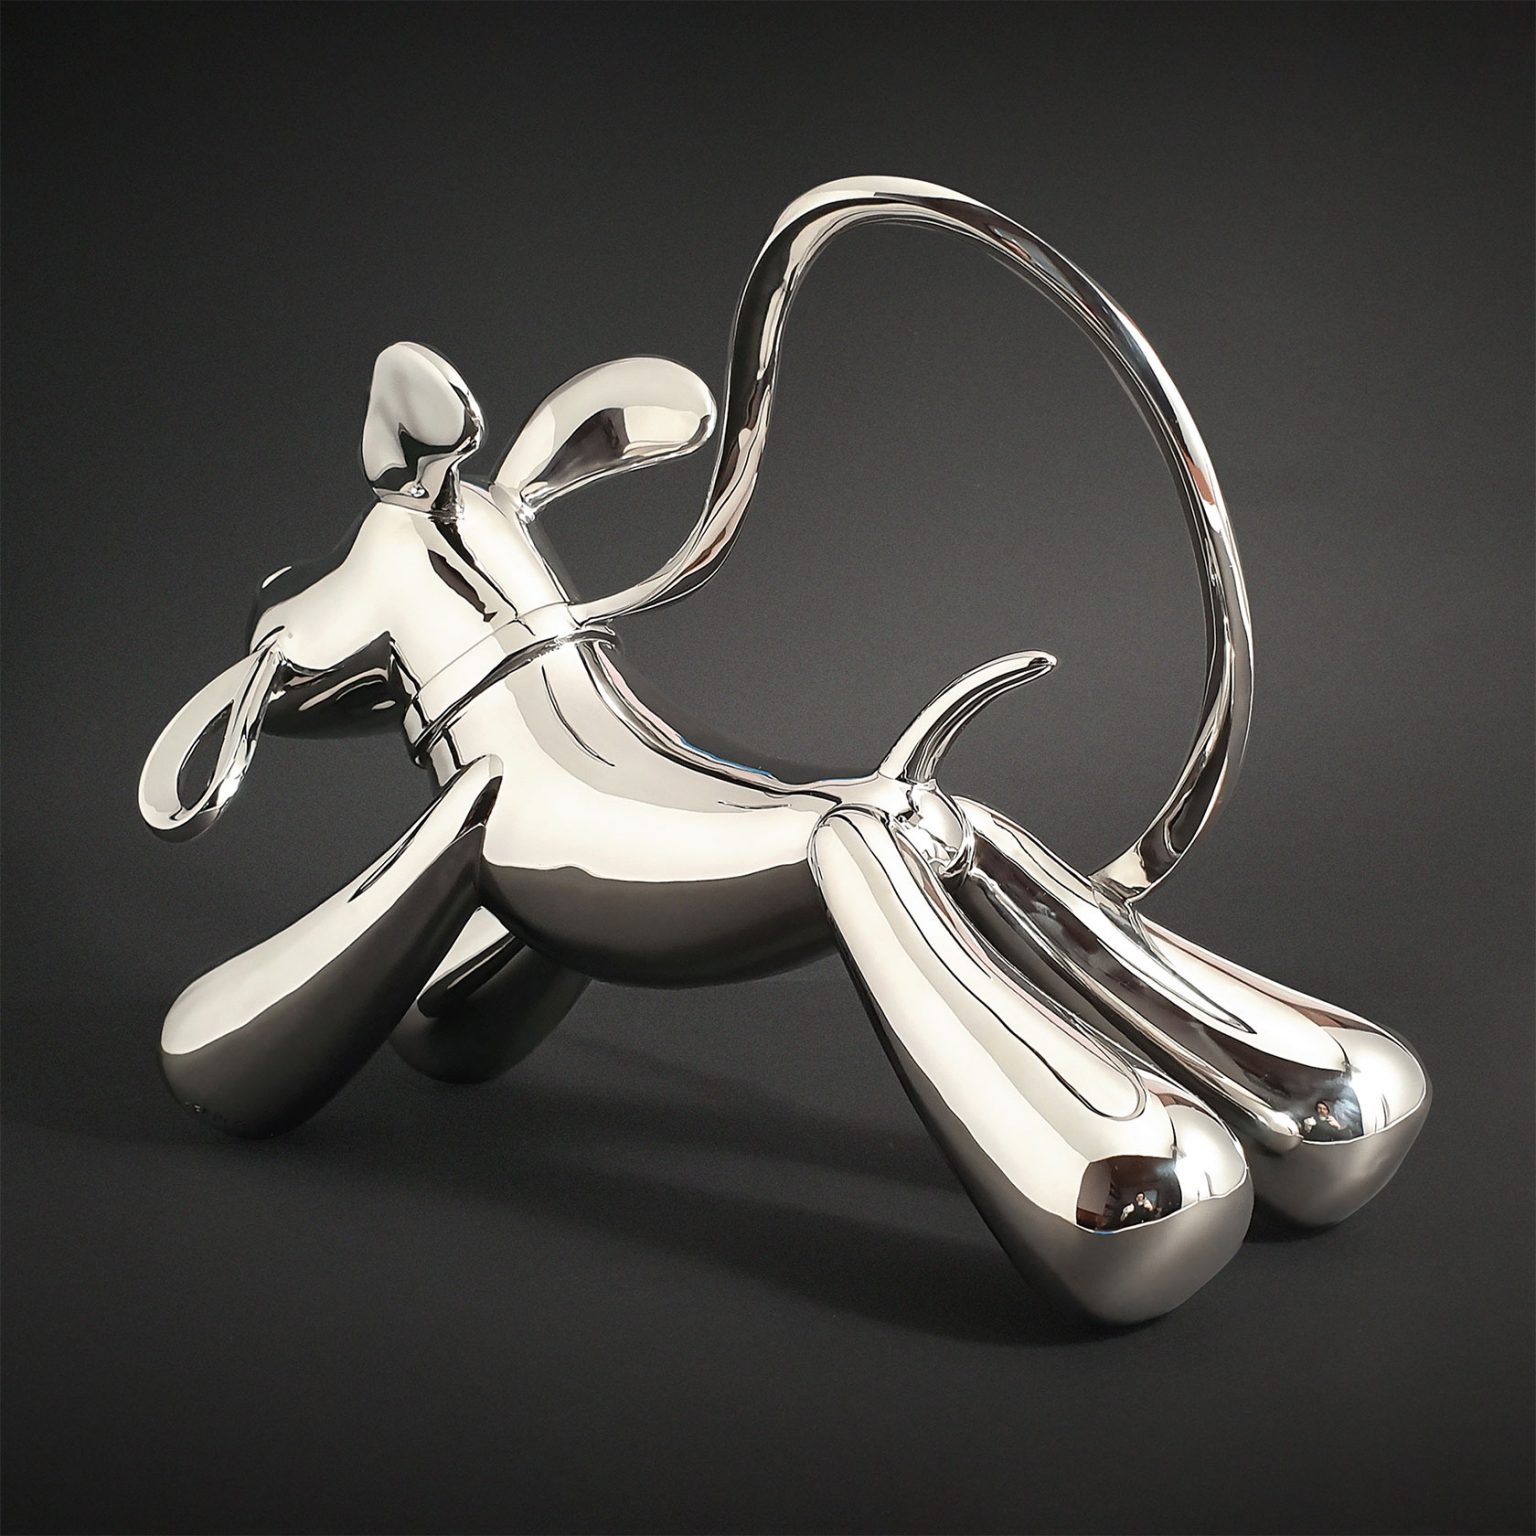 Quirky Polished Metal Sculptures by Ferdi B. Dick | Daily design ...